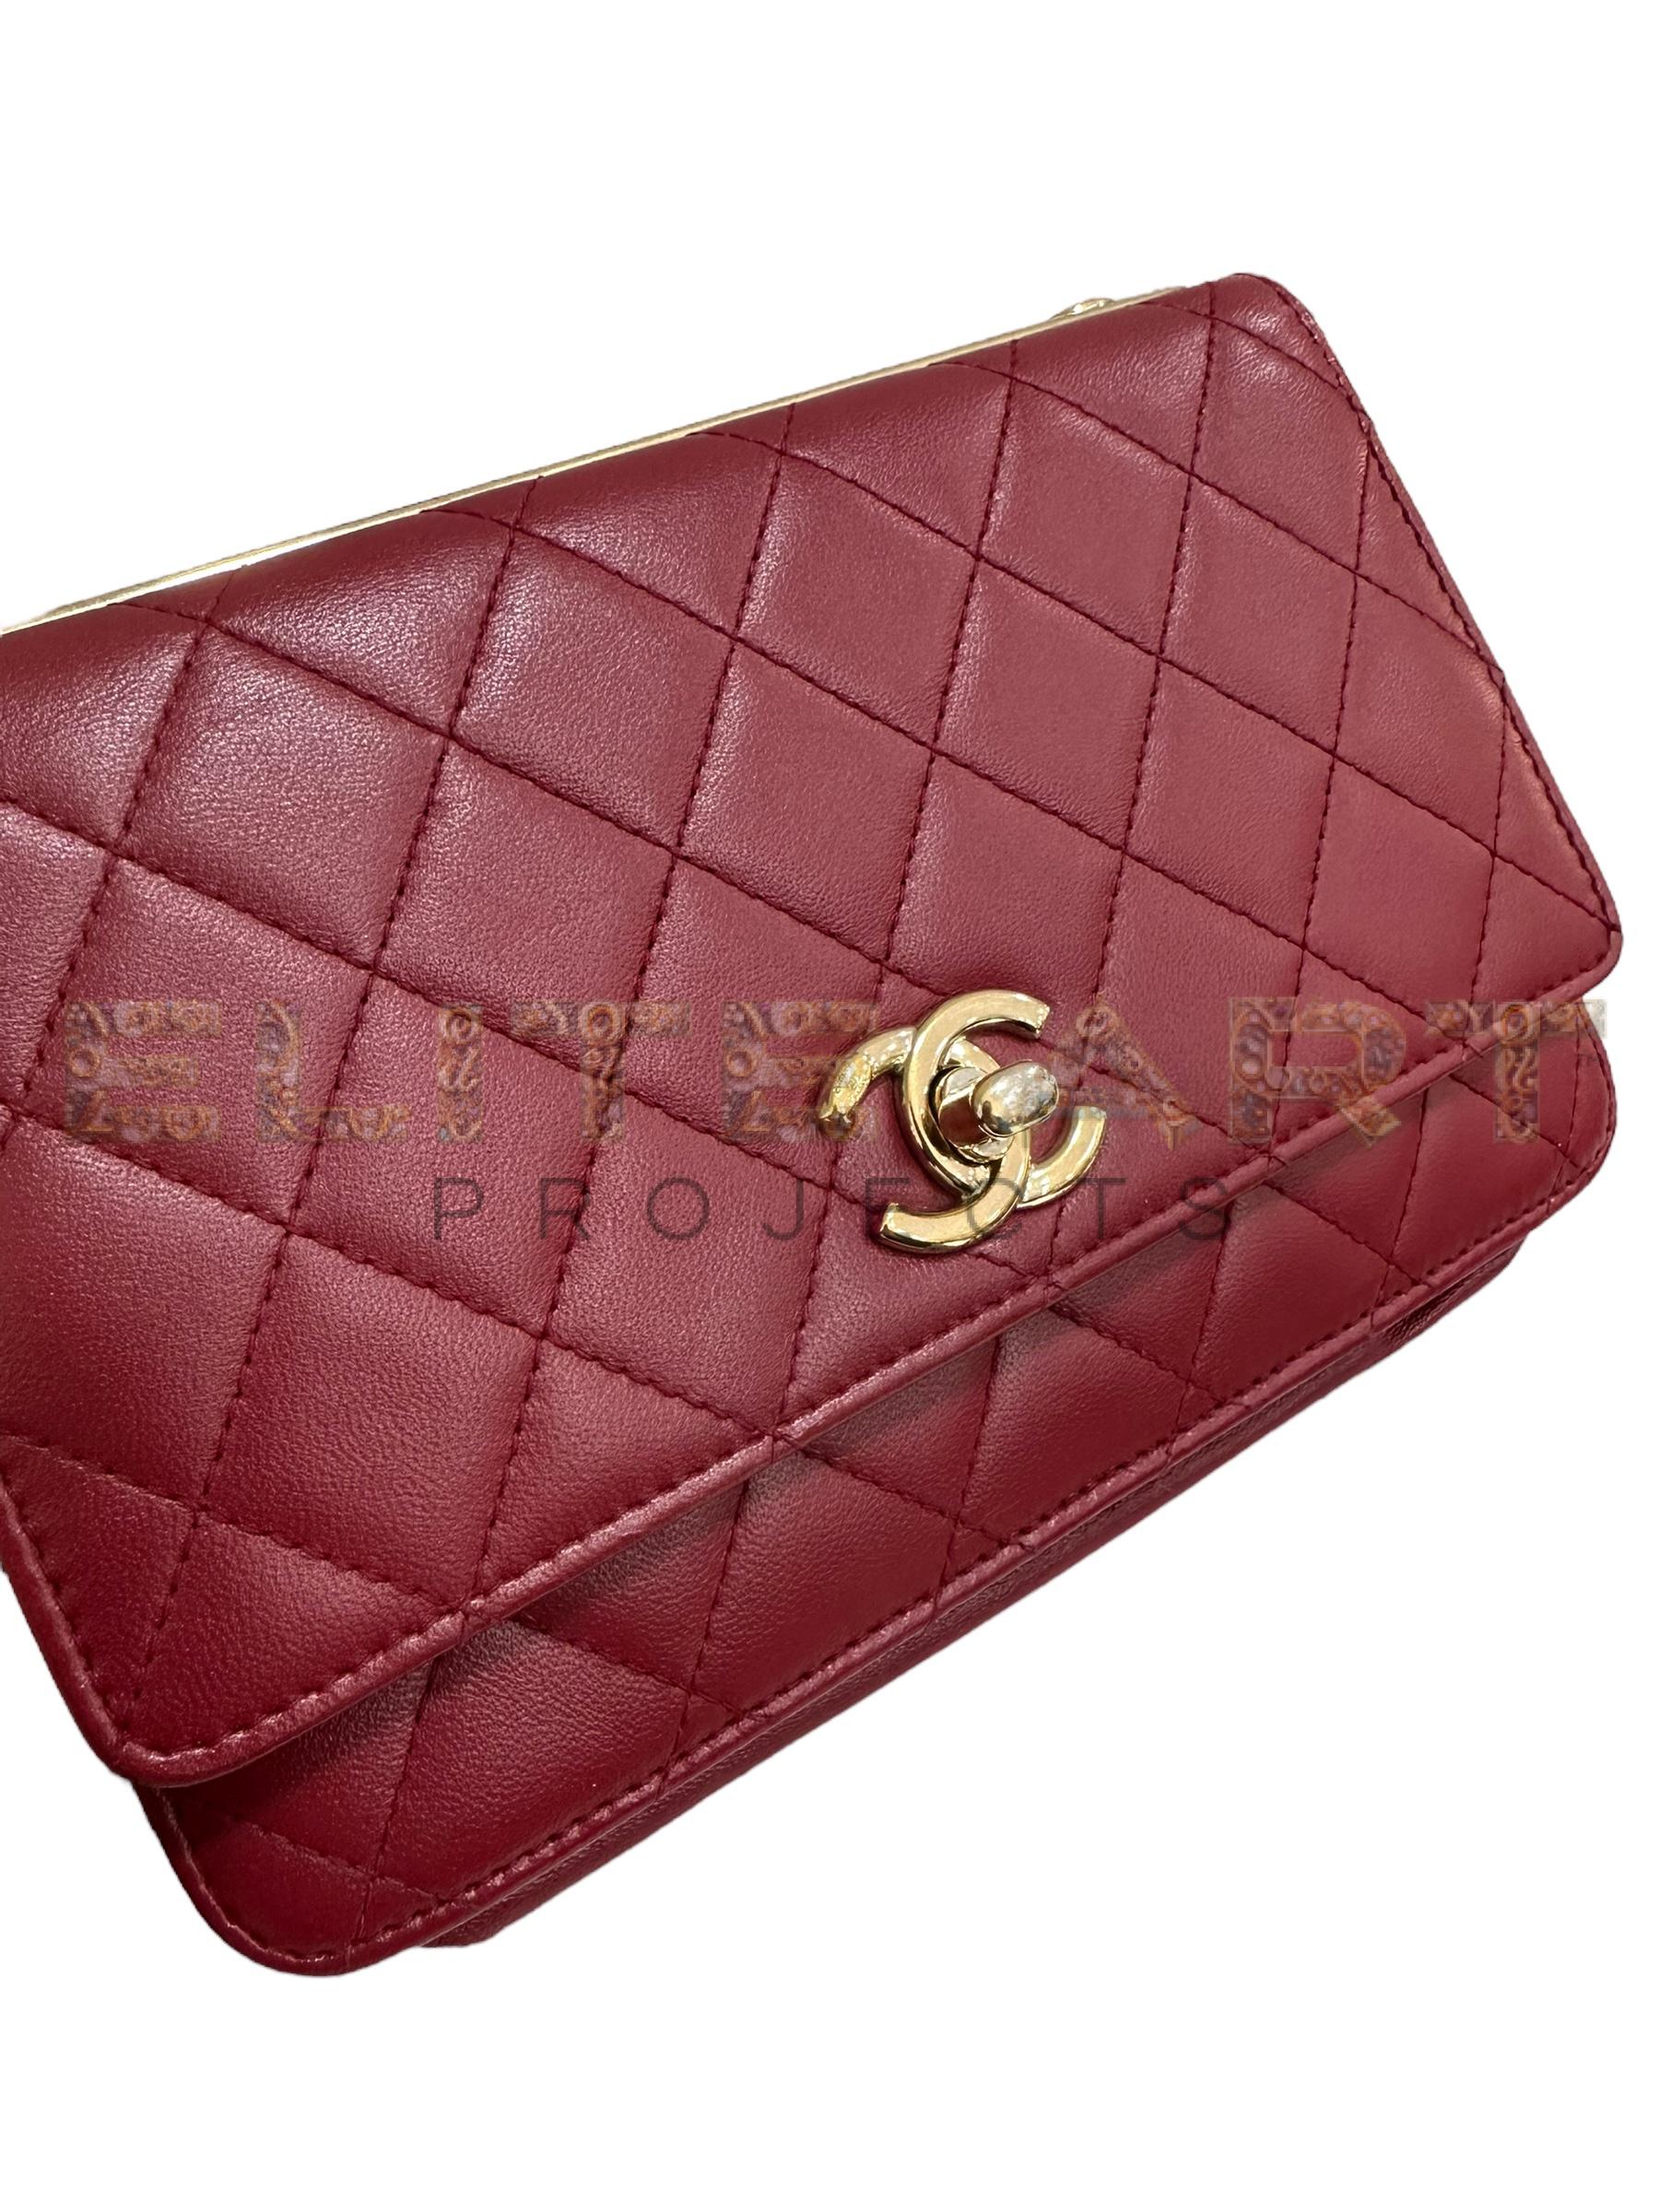 Wallet On Chain bag, red leather, gold inserts, elegance